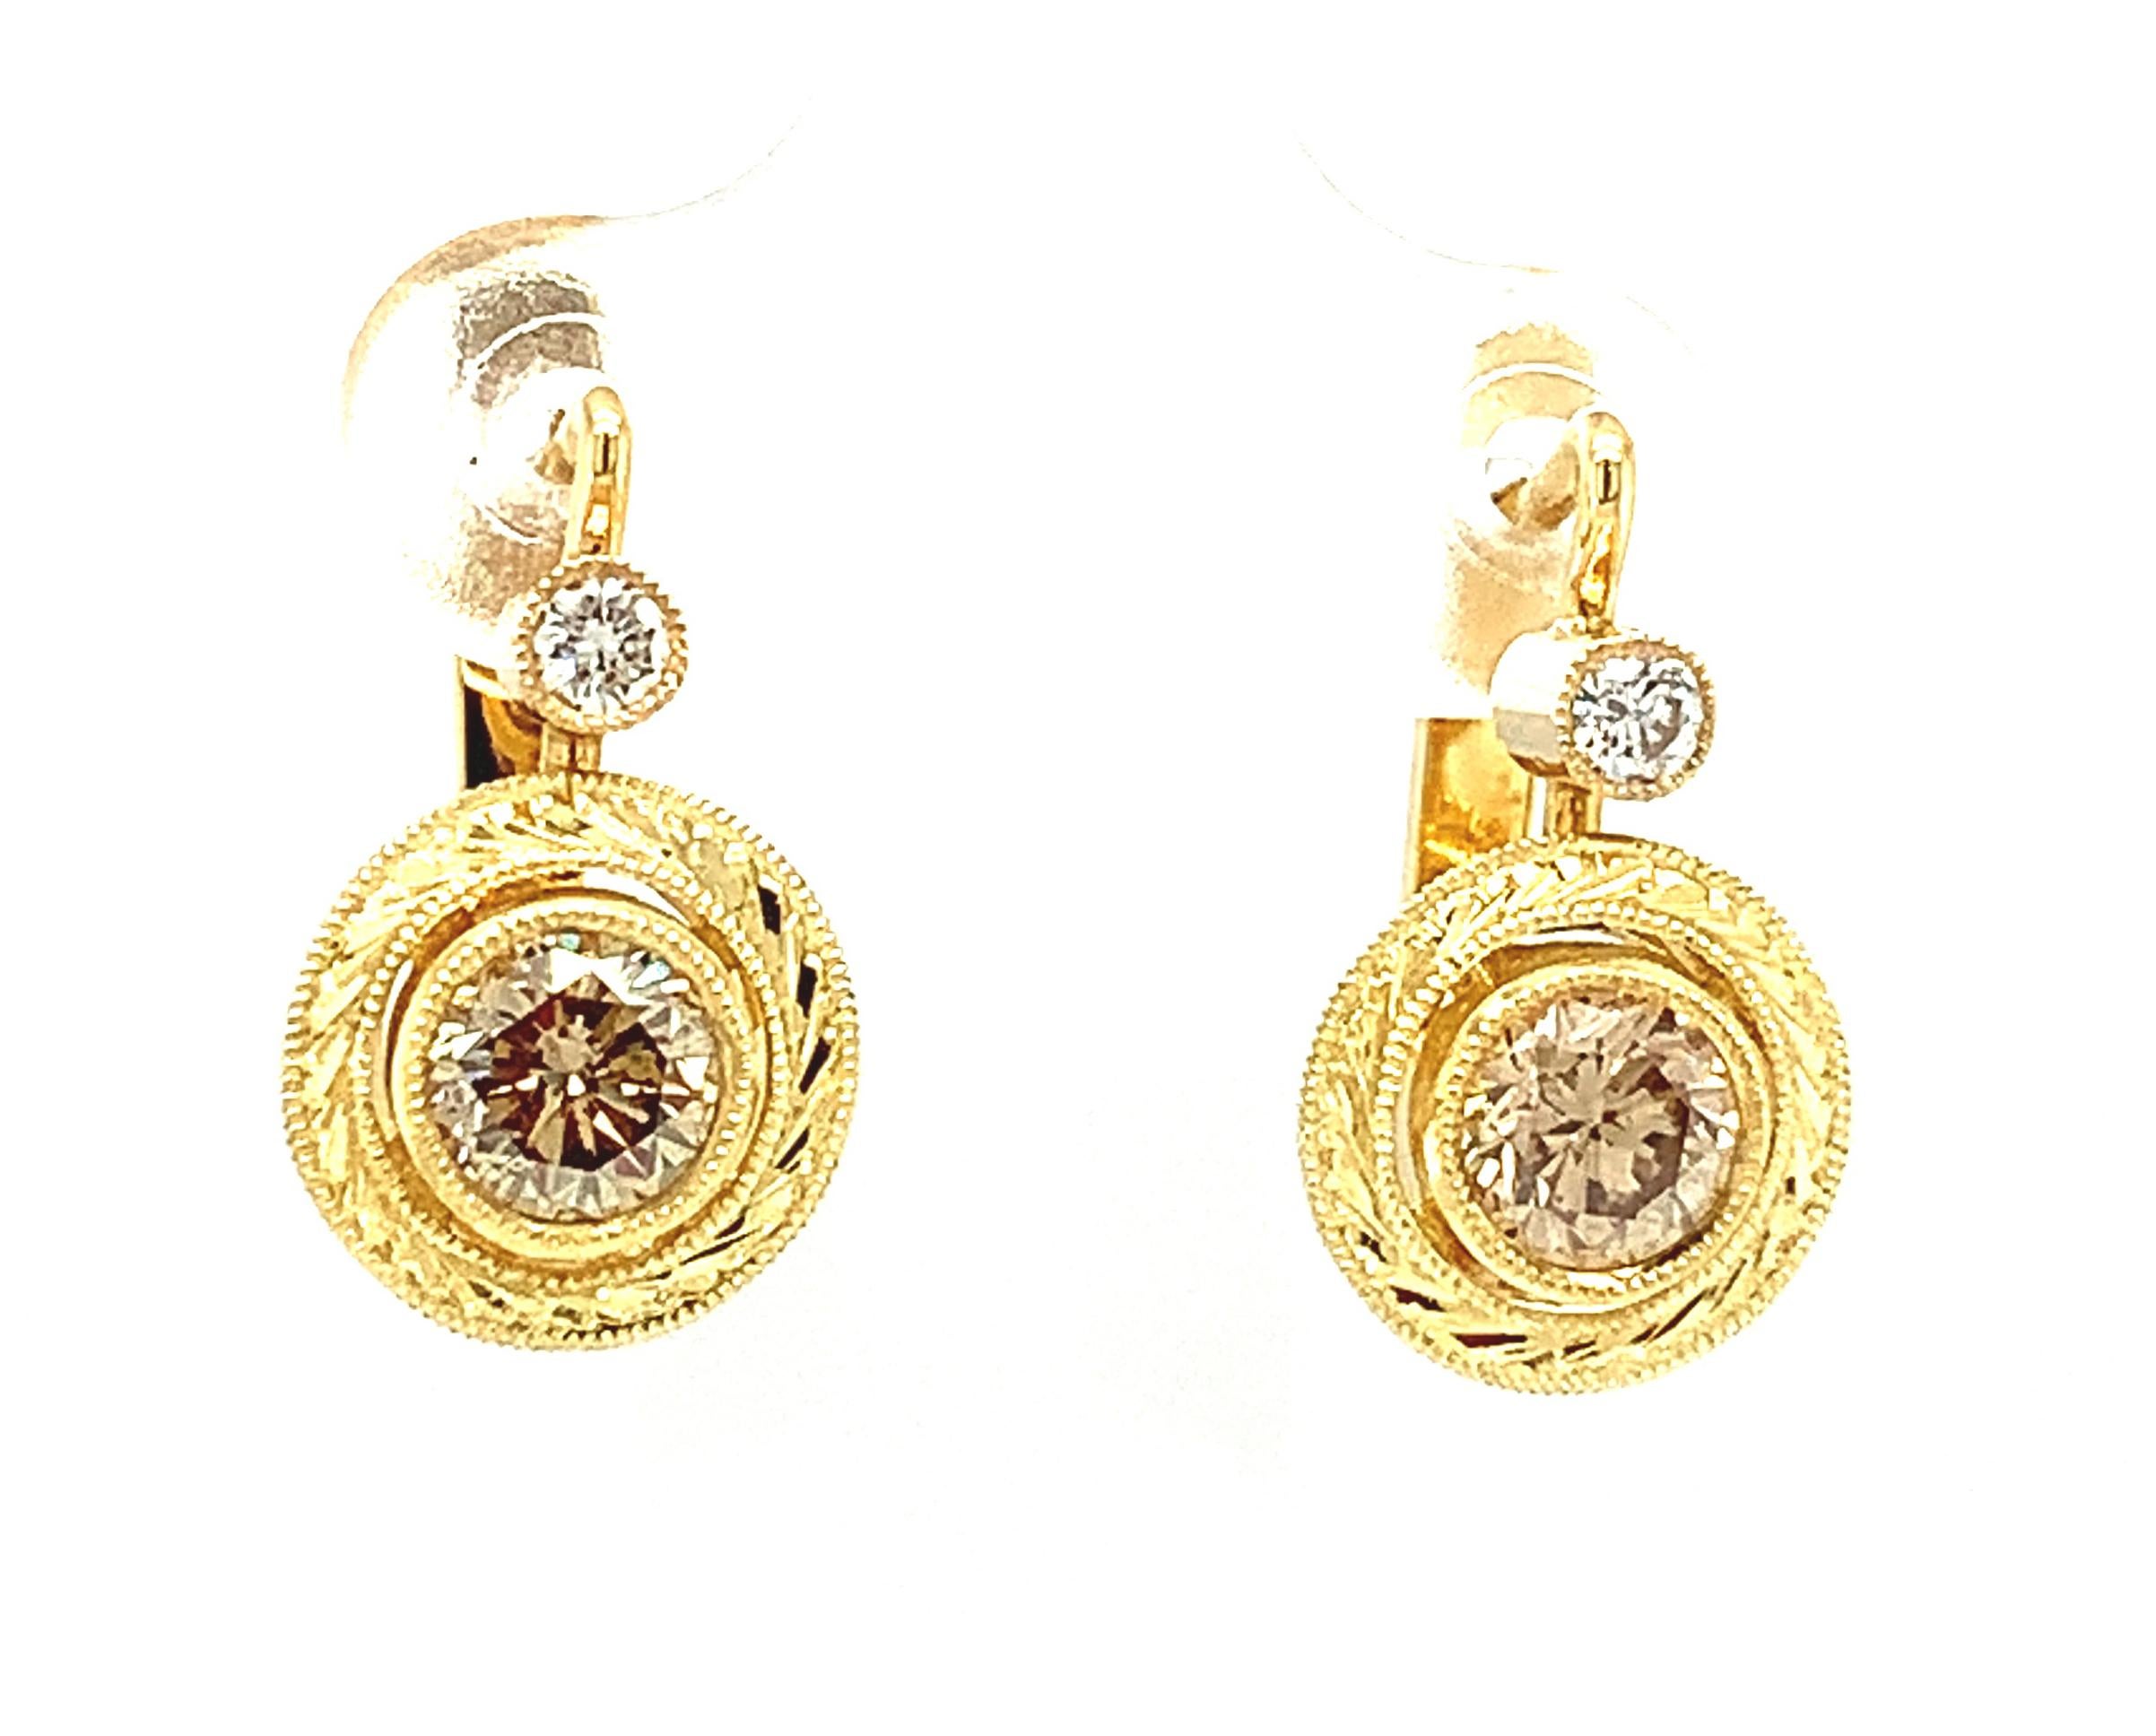 These elegant and stylish lever-back drop earrings feature exquisite, round brilliant cut champagne color diamonds and round white diamonds in hand engraved 18k yellow gold bezels. A 